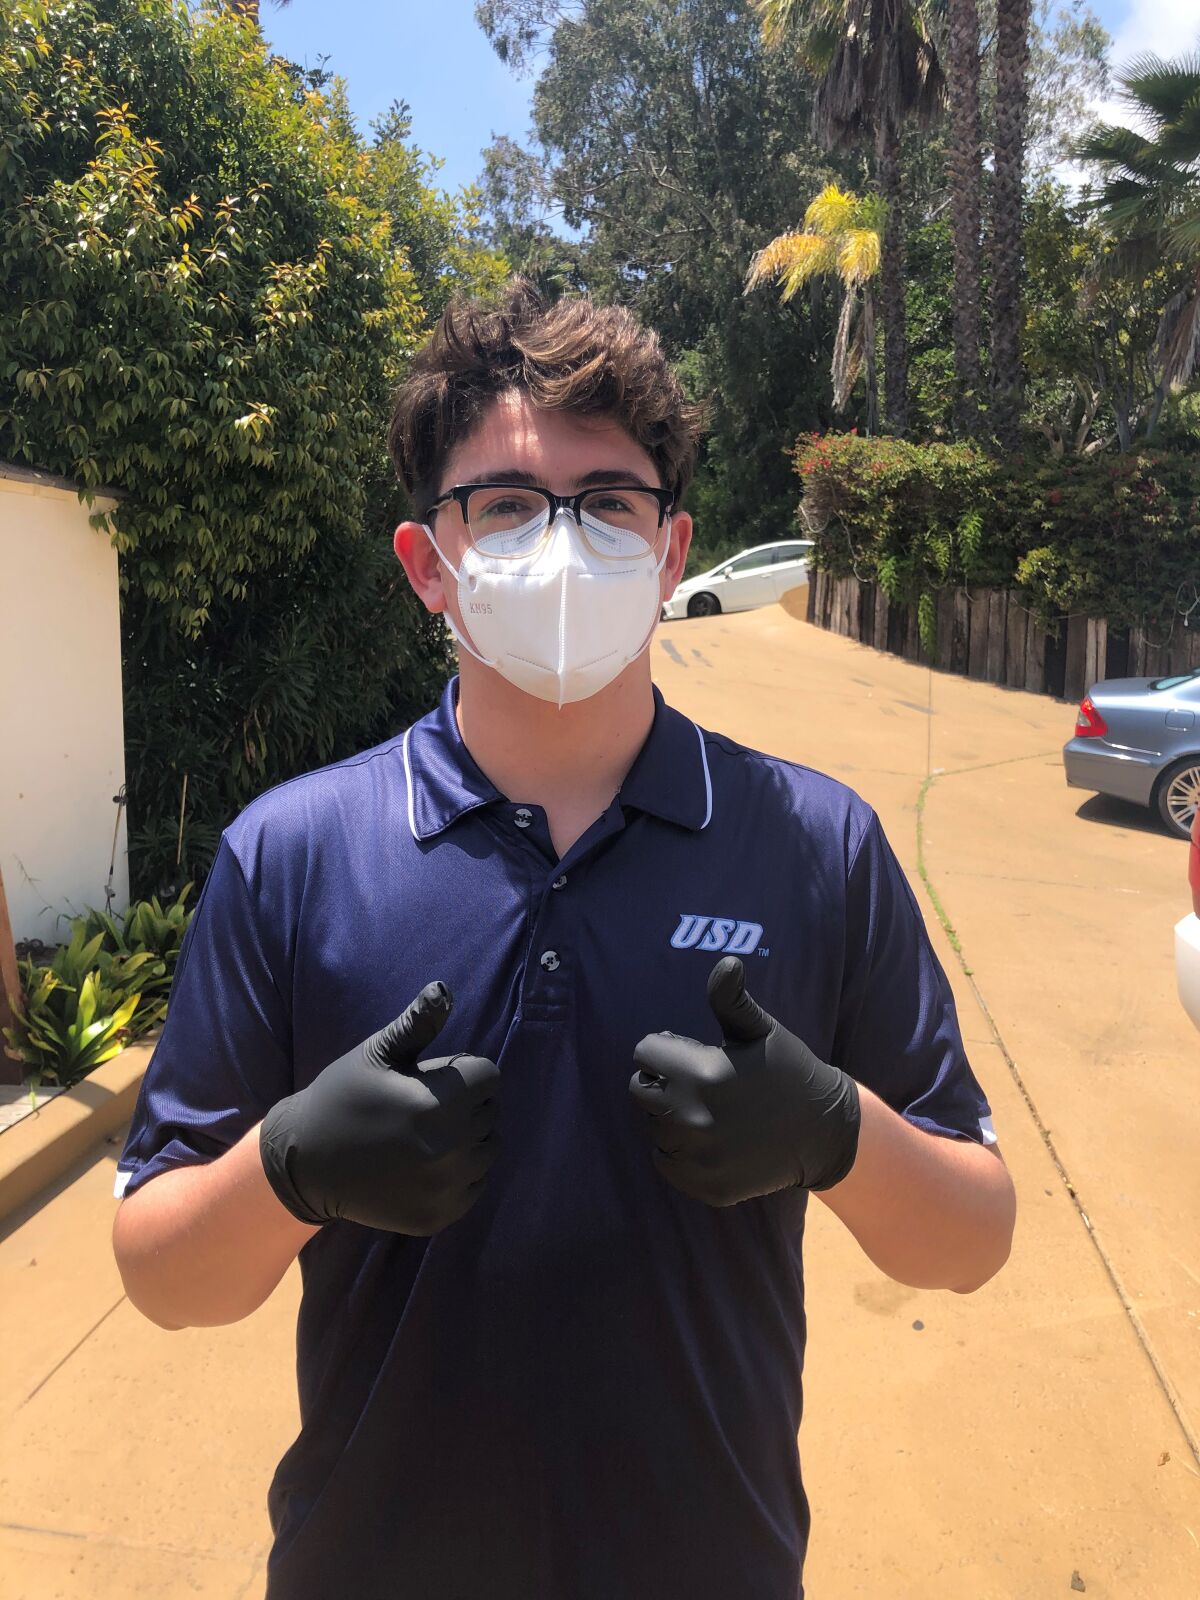 La Jolla High School sophomore Max Stone shows Zoomers to Boomers' shopping and delivery safety precautions, including mask and gloves.